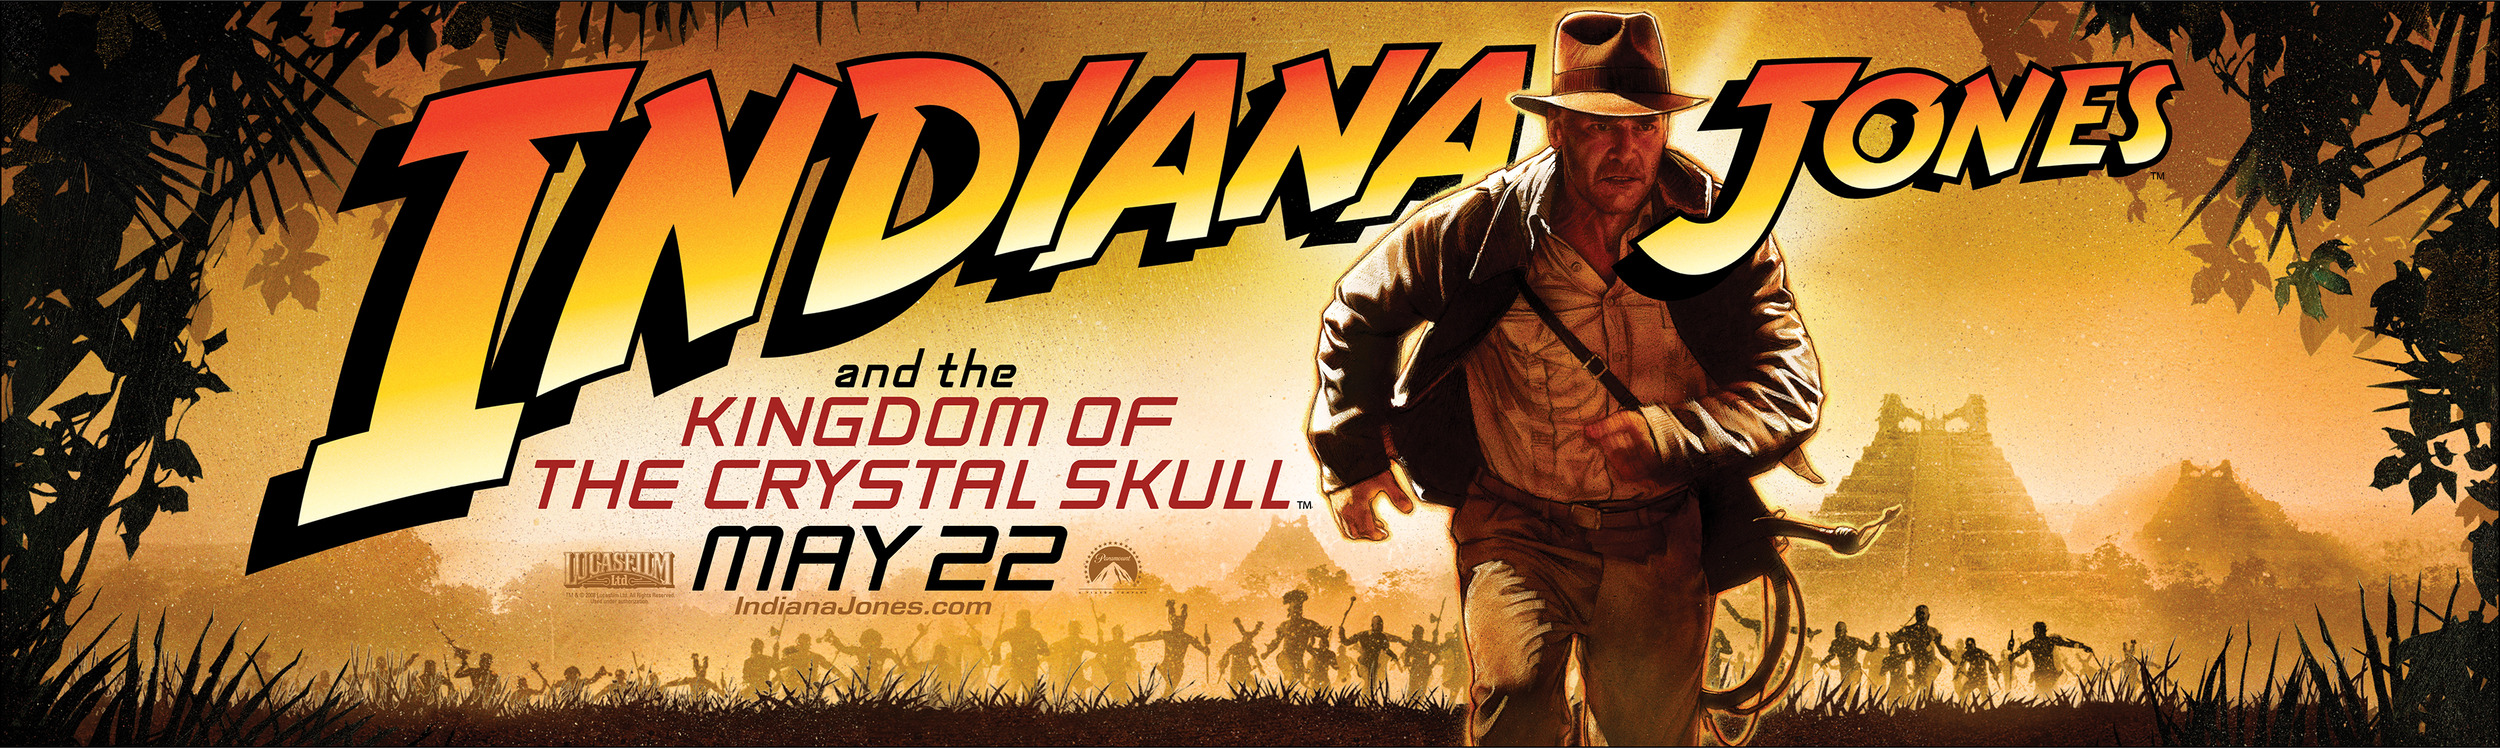 Mega Sized Movie Poster Image for Indiana Jones and the Kingdom of the Crystal Skull (#8 of 11)